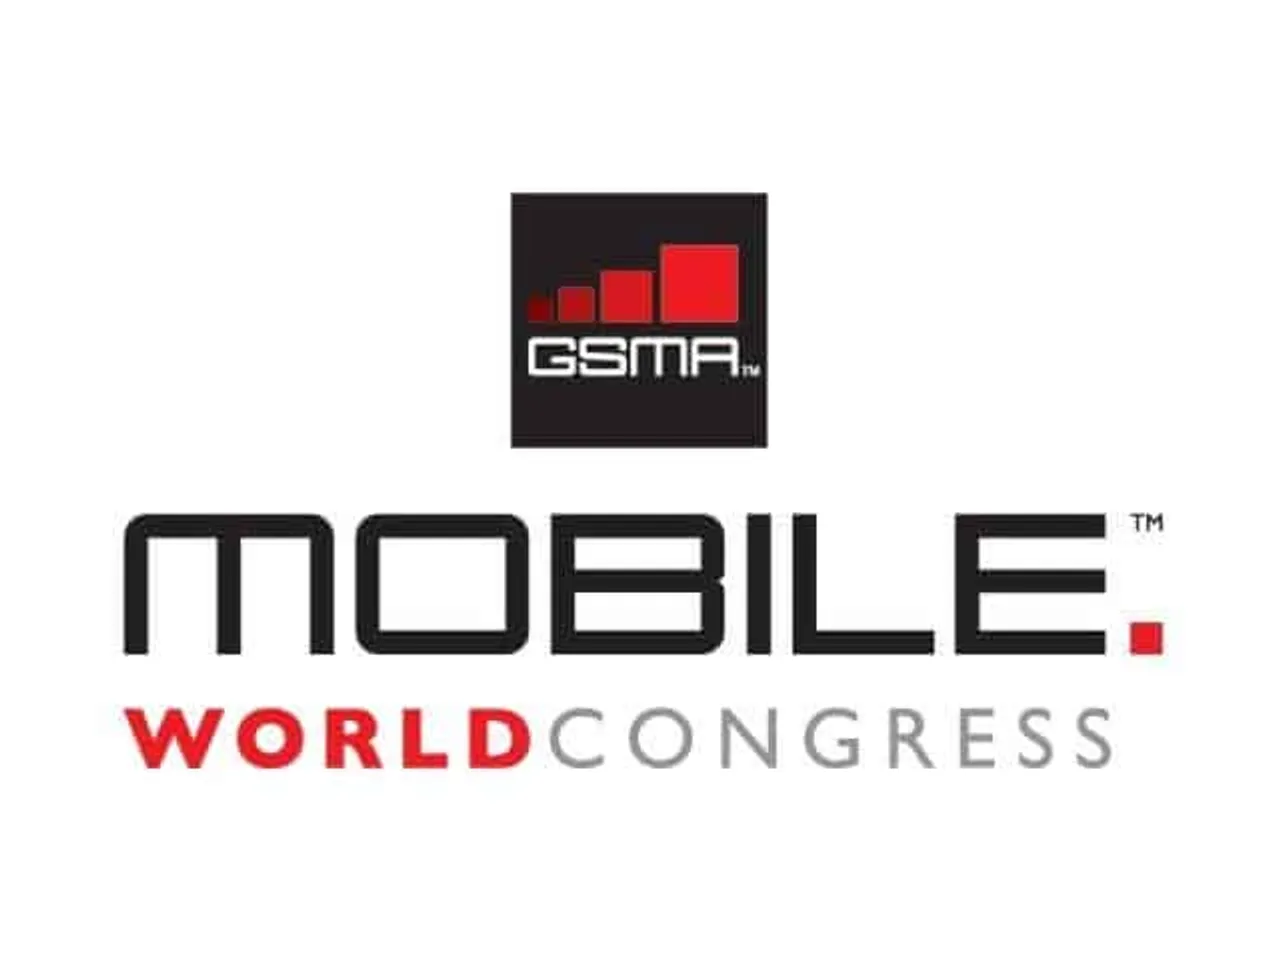 Record-Breaking Year for Mobile World Congress, Sees 7 Percent Increase in Visitors